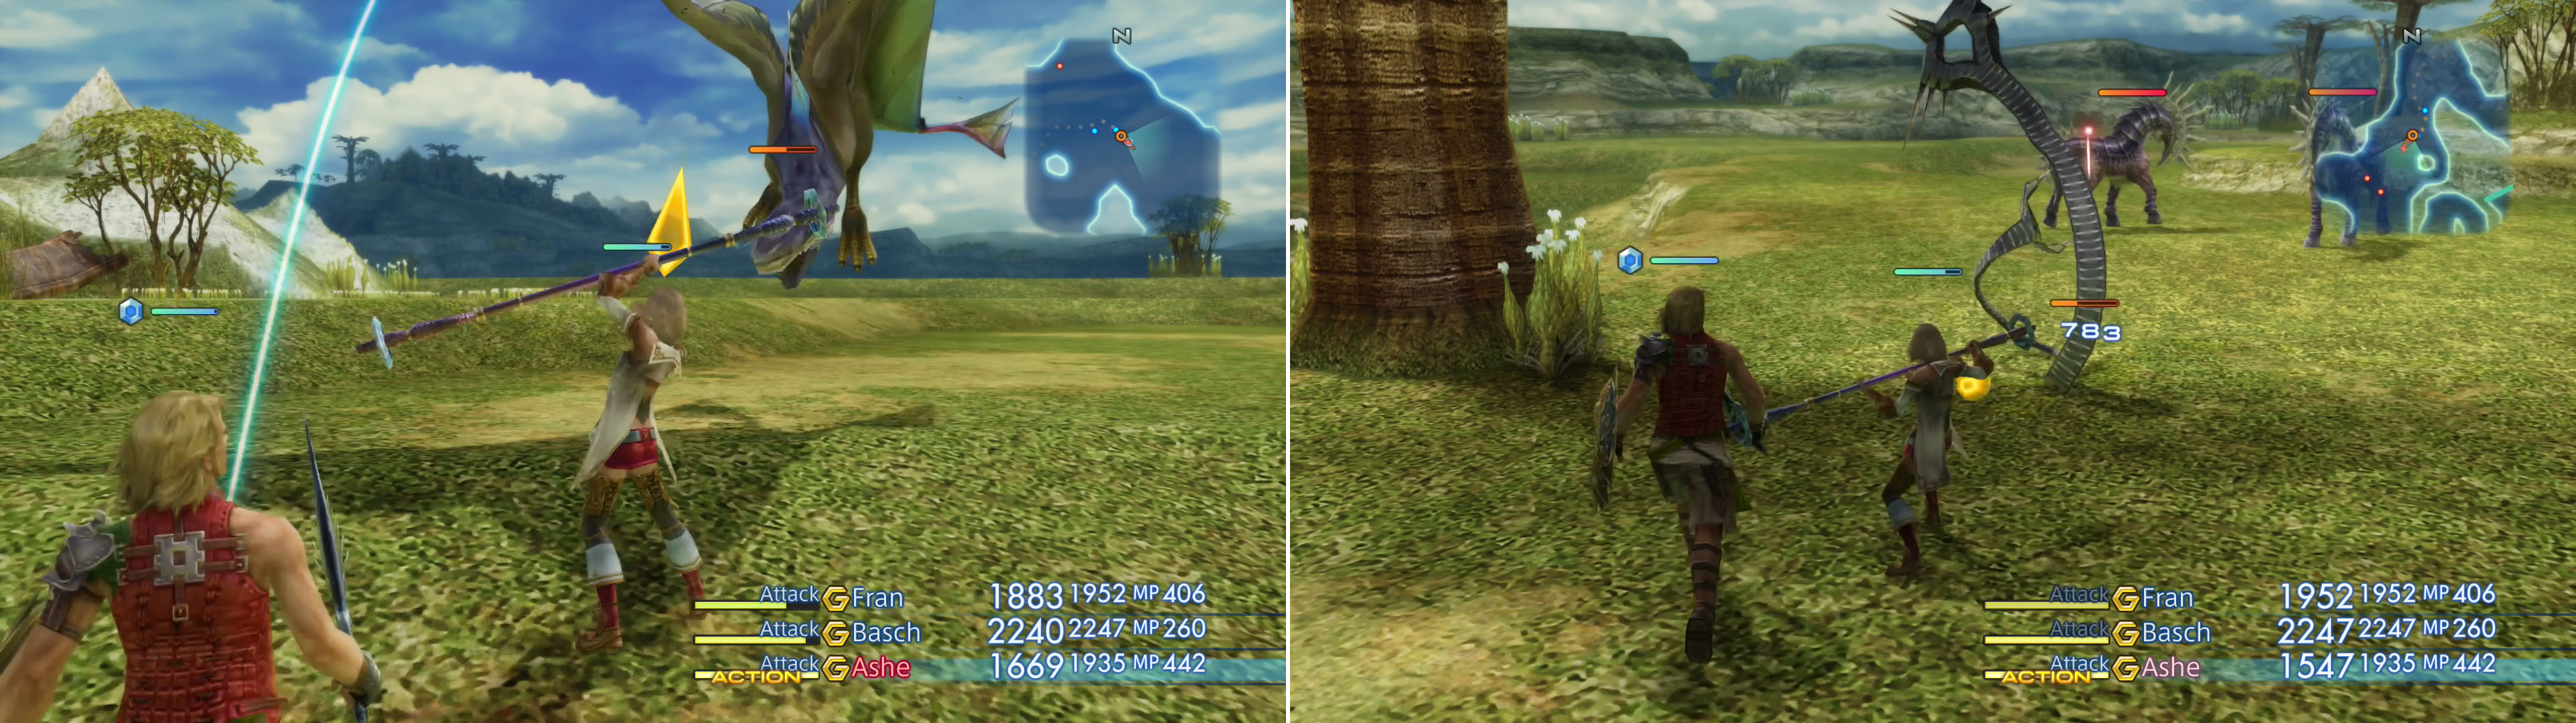 New enemies in the Ozmone Plain include the flying menace, Zu (left) and the sneaky Viper (right).